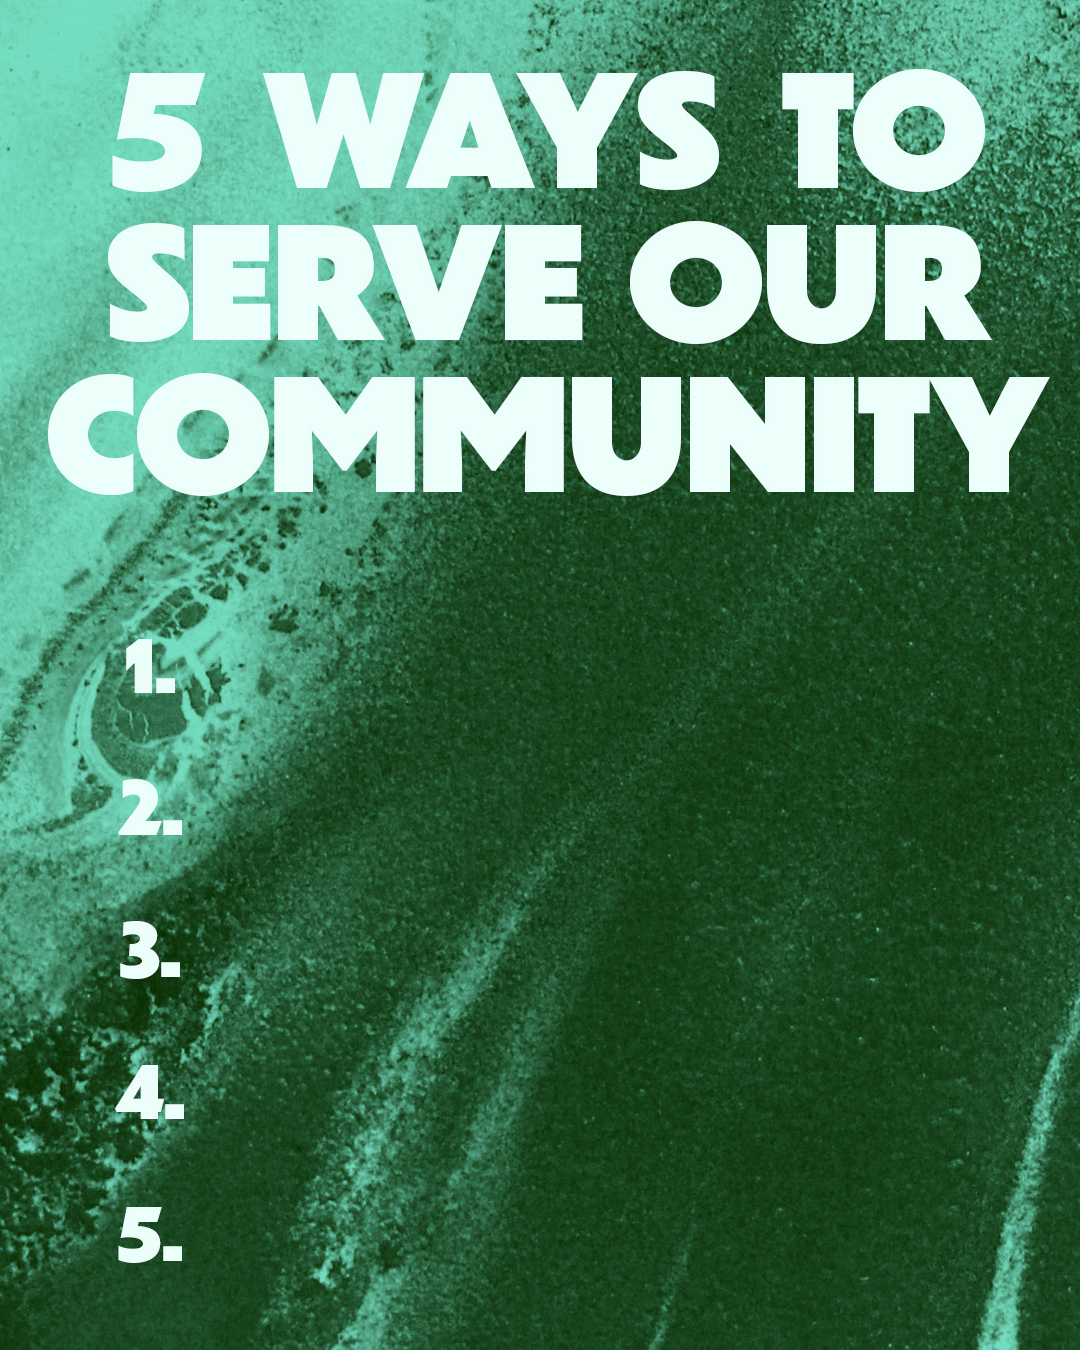 5 ways to serve our community